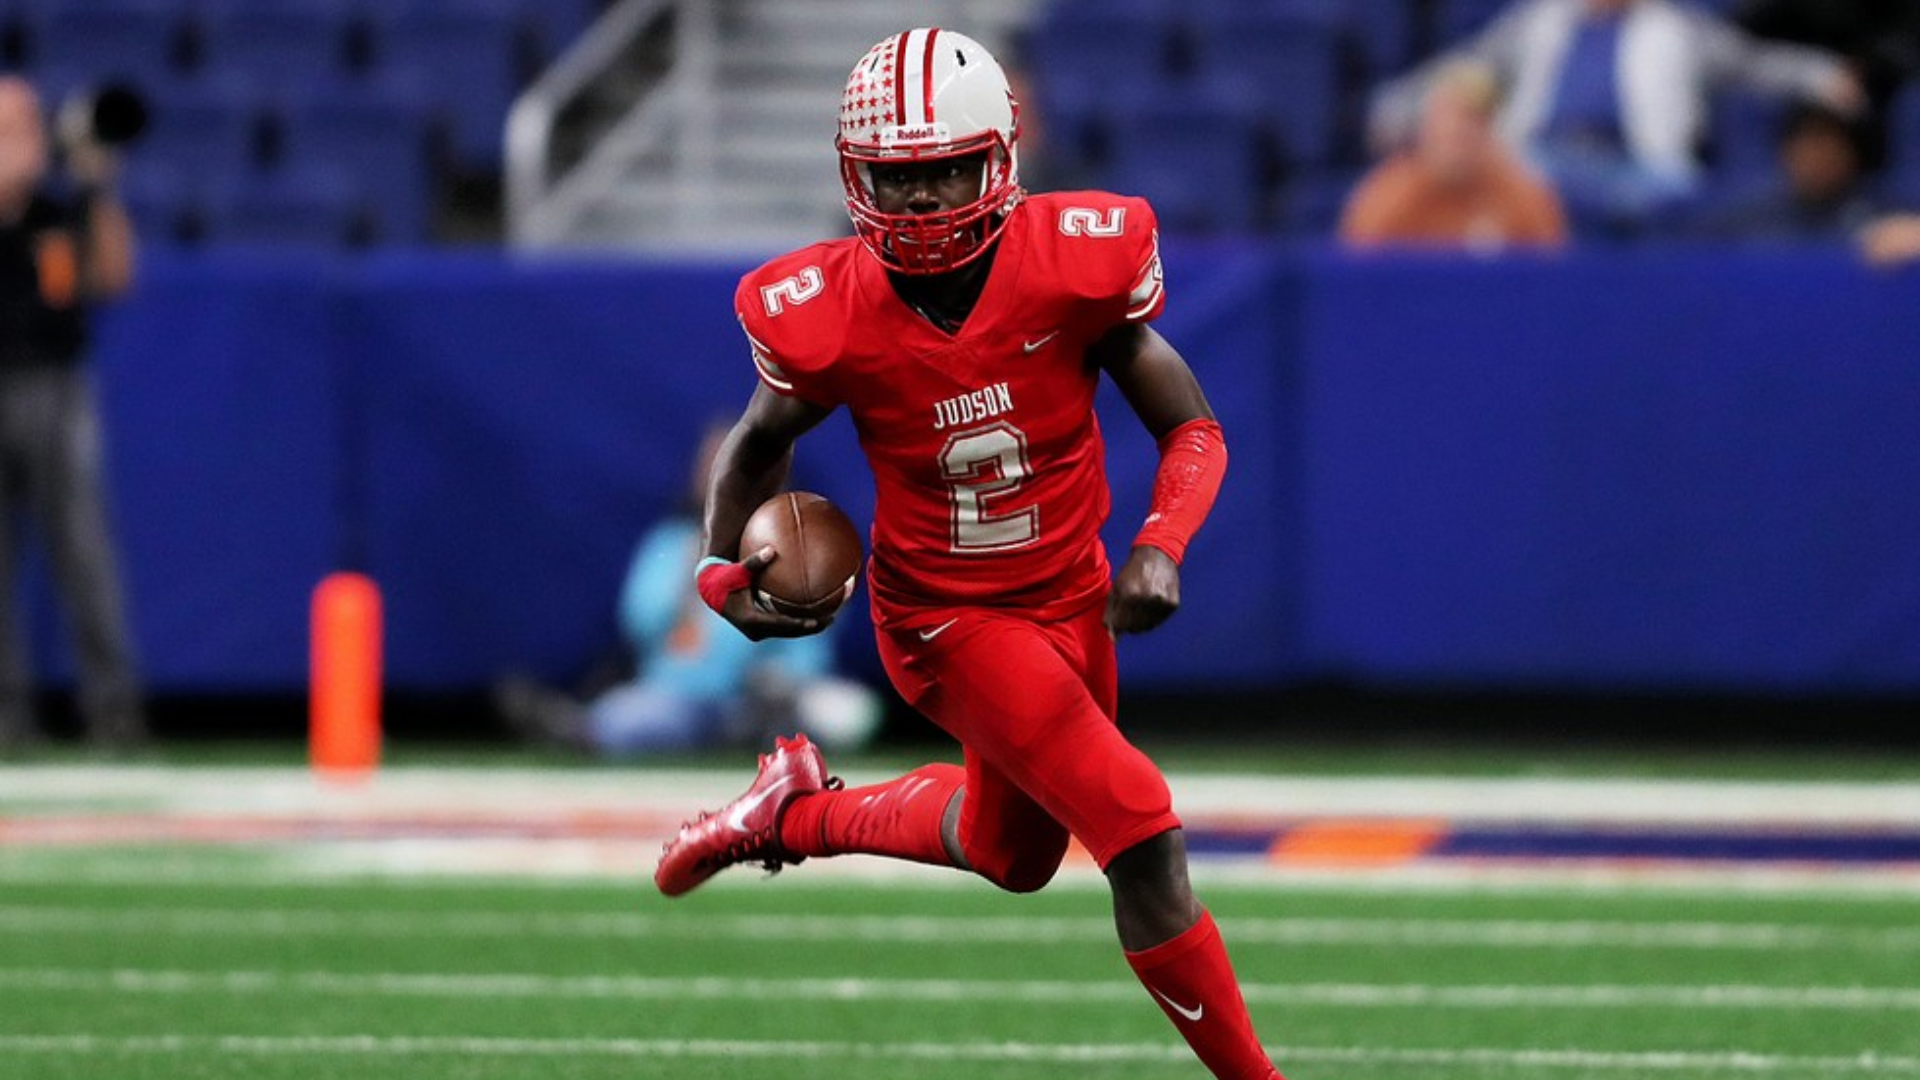 Outlook: Judson is still the team to beat, even though coach Rodney Williams is new.  They bring back reigning offensive MVP Rodney Chandler at the QB spot.